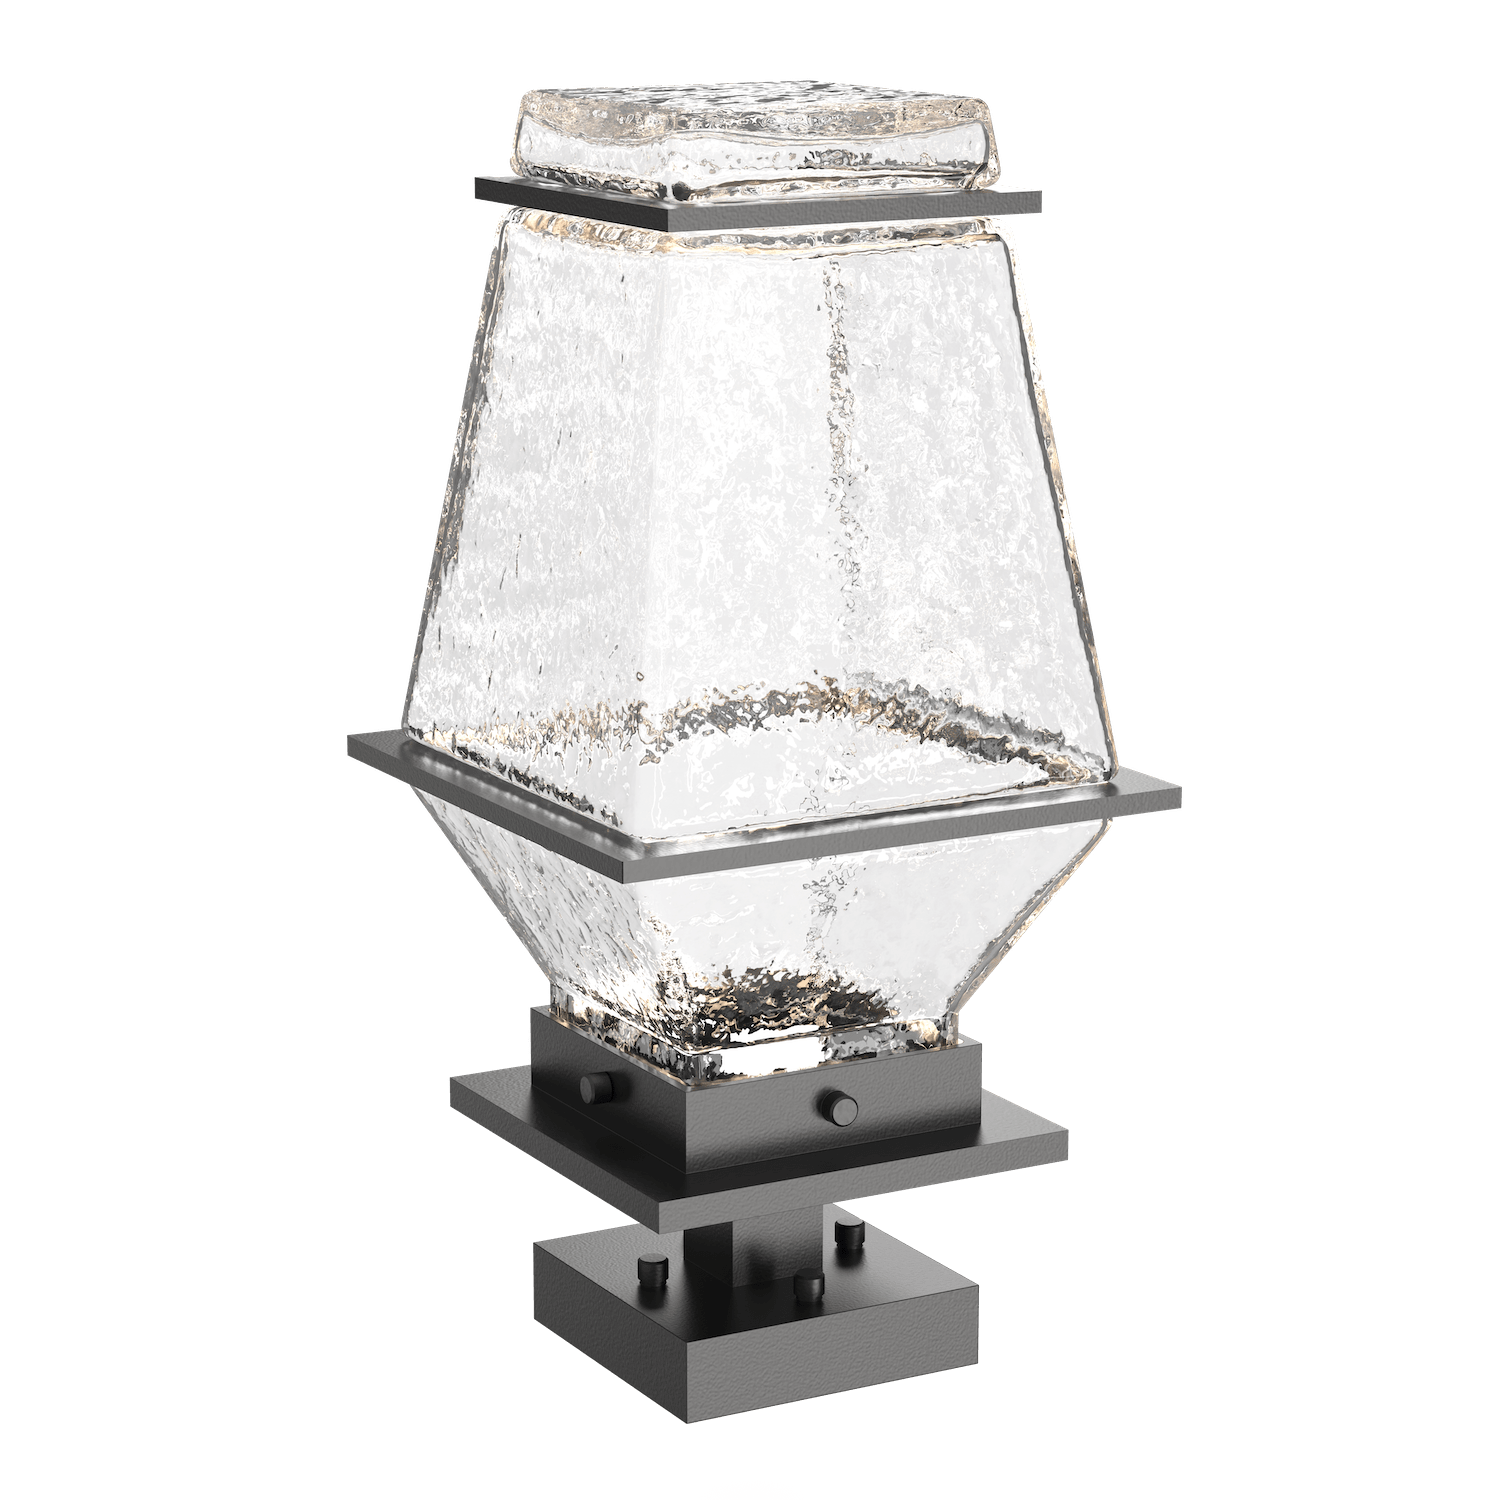 OMB0077-01-AG-C-Hammerton-Studio-Landmark-16-inch-pier-mount-light-with-argento-grey-finish-and-clear-blown-glass-shades-and-LED-lamping